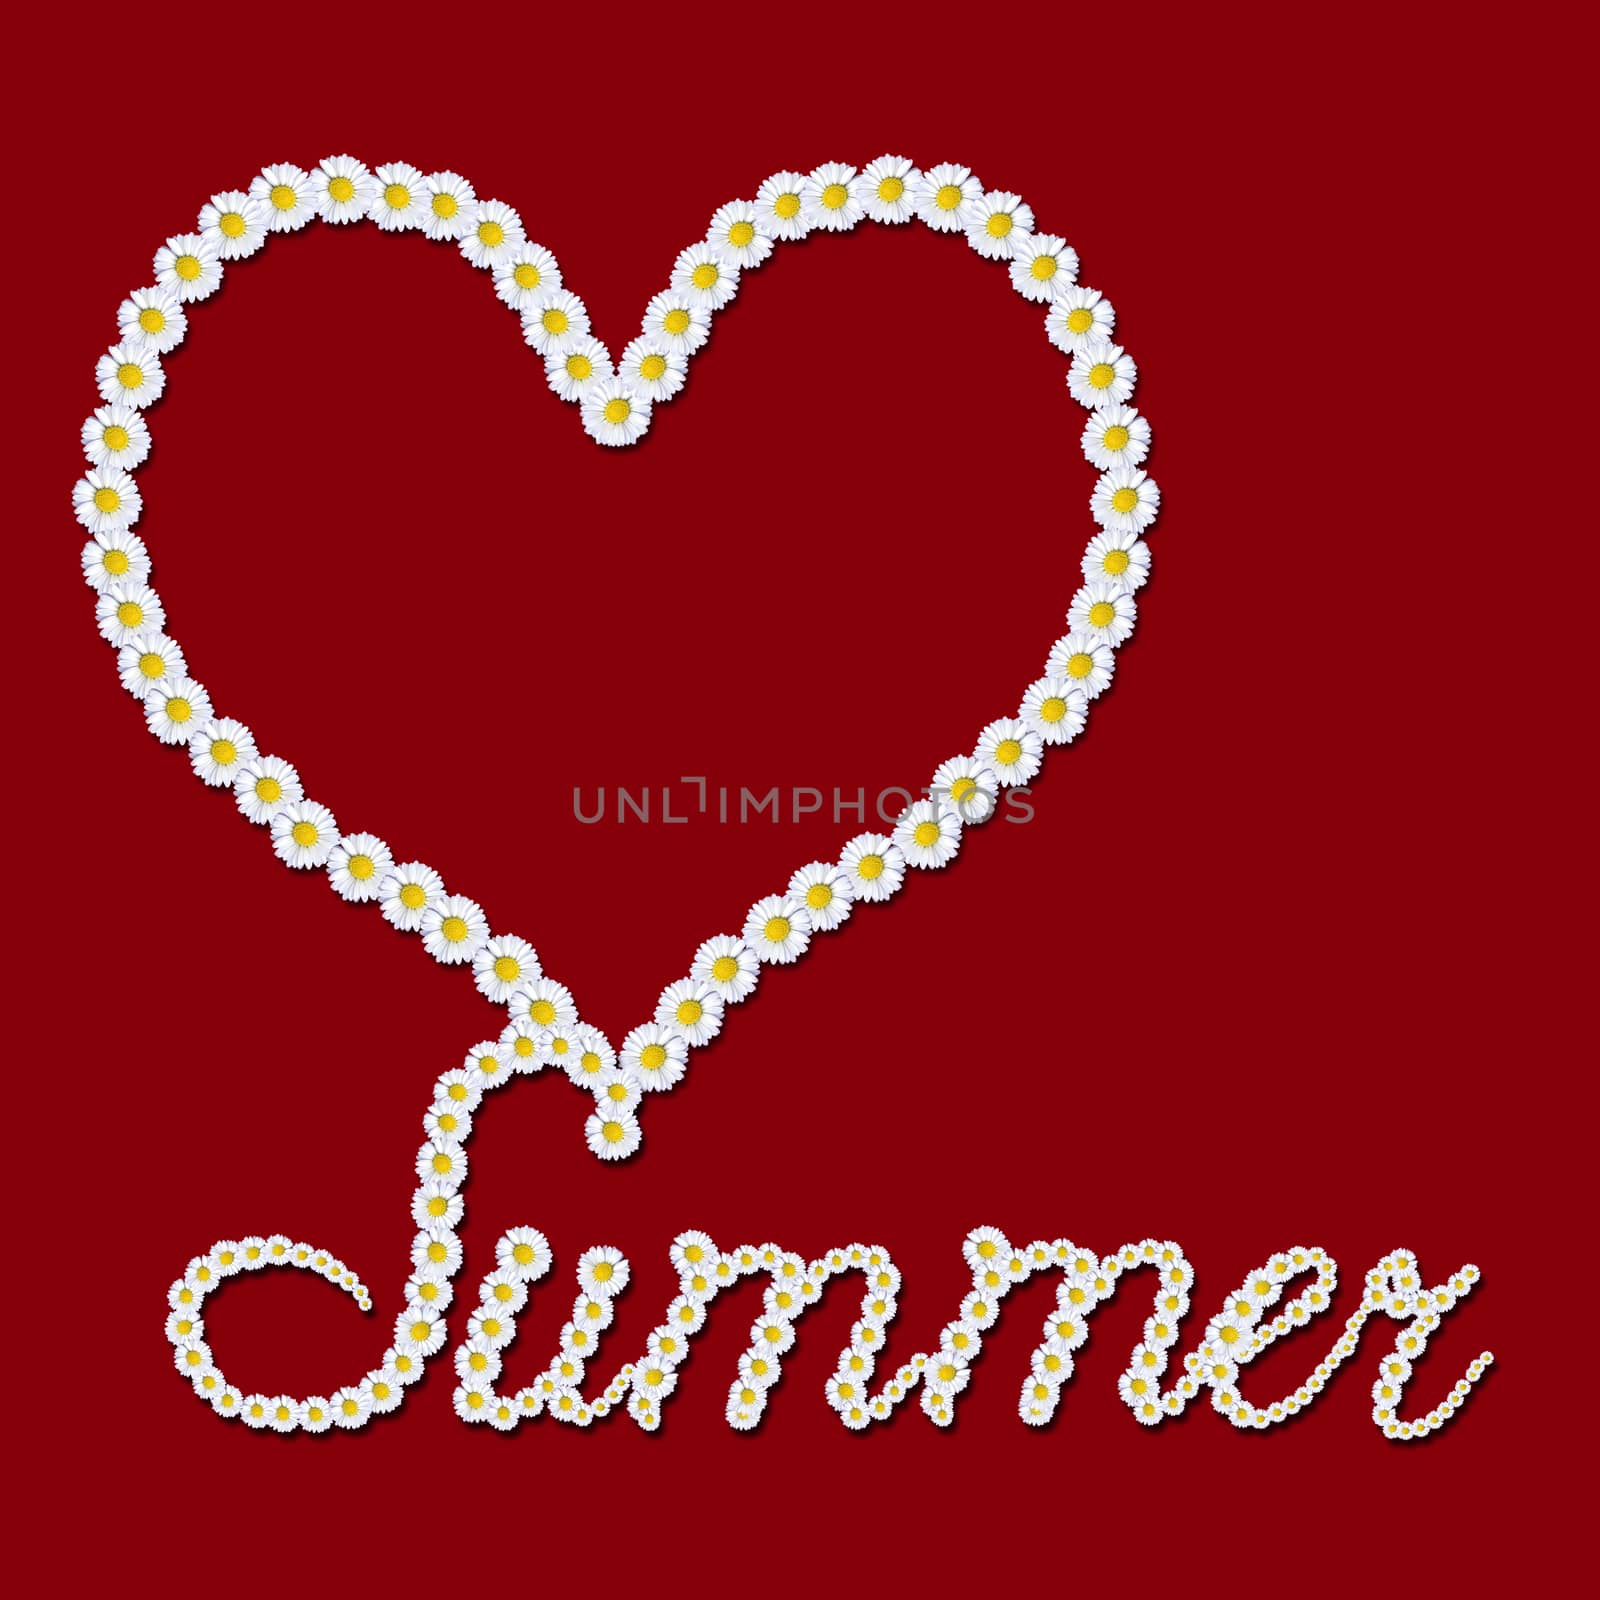 Summer  background, heart and text made with daisies on red background with copy space for text or photos